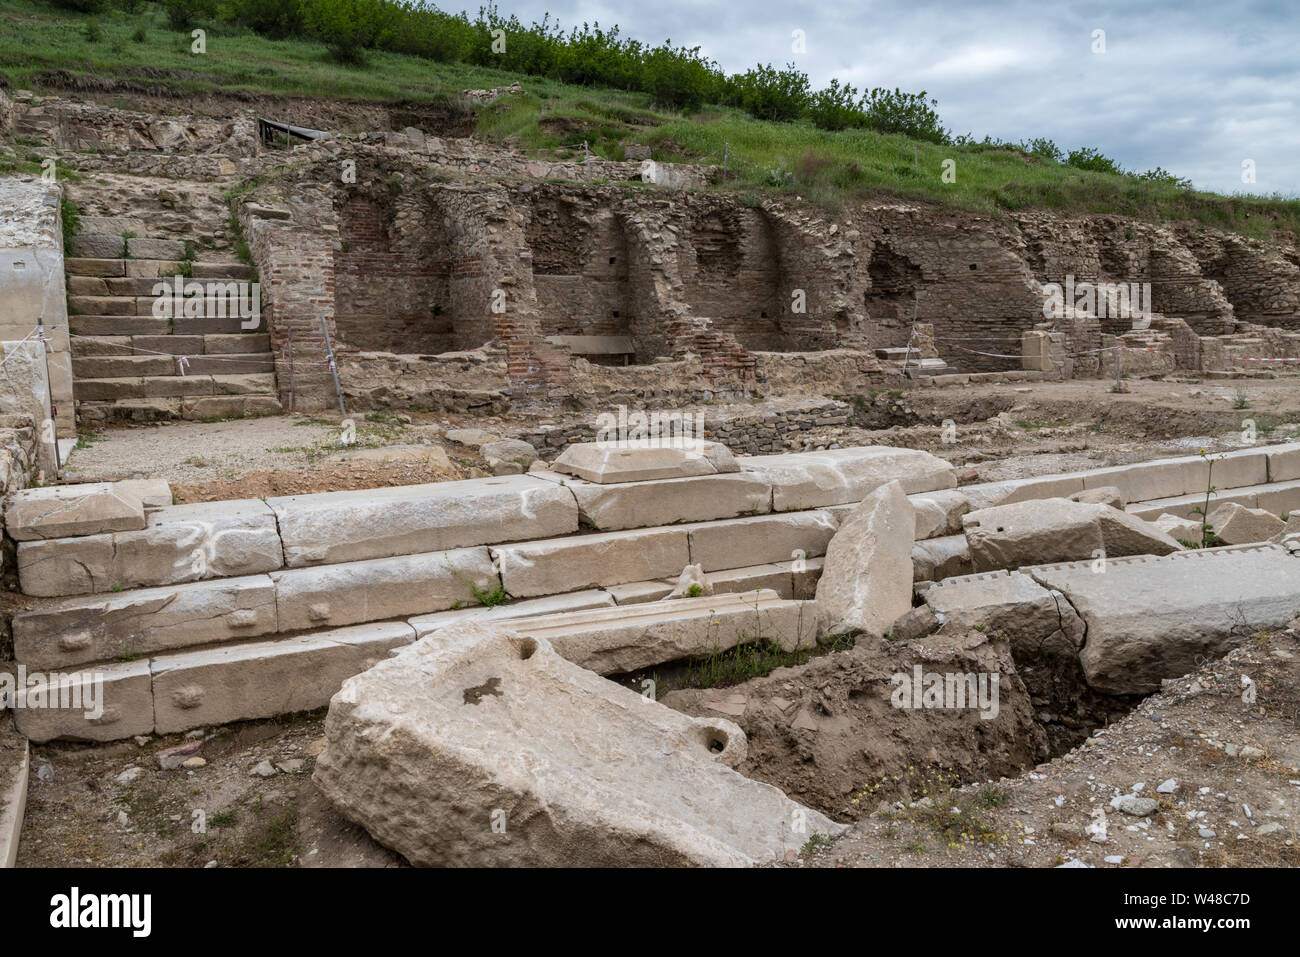 Heraclea Sintica - Ruins of ancient Greek polis, located near town of Petrich, Bulgaria Stock Photo